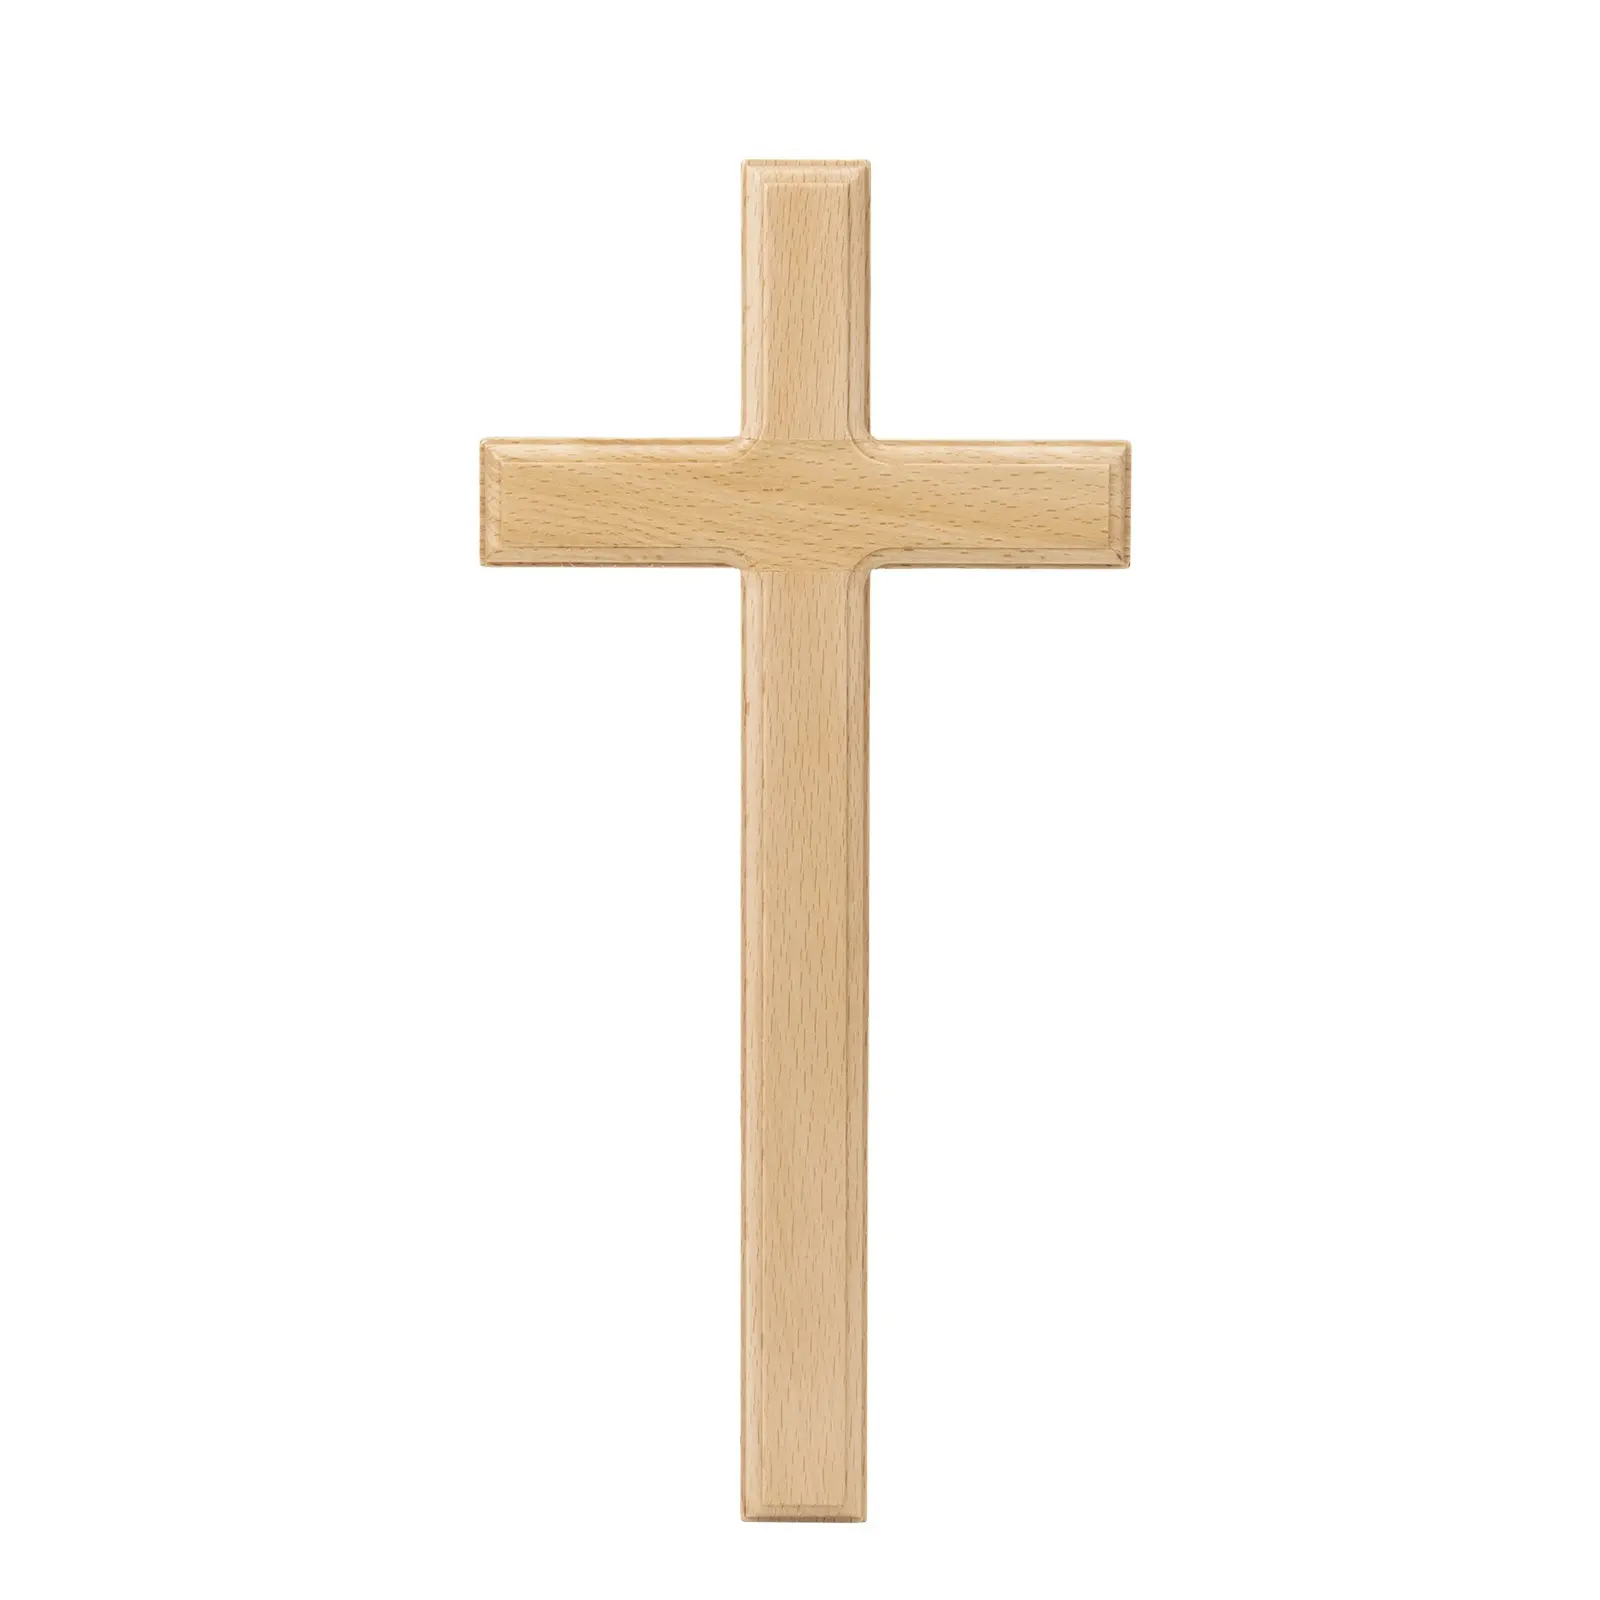 Wholesale Wood Wall Hanging Sign Plaque Wooden Cross Christian Hanging Wooden Wall Cross for wall